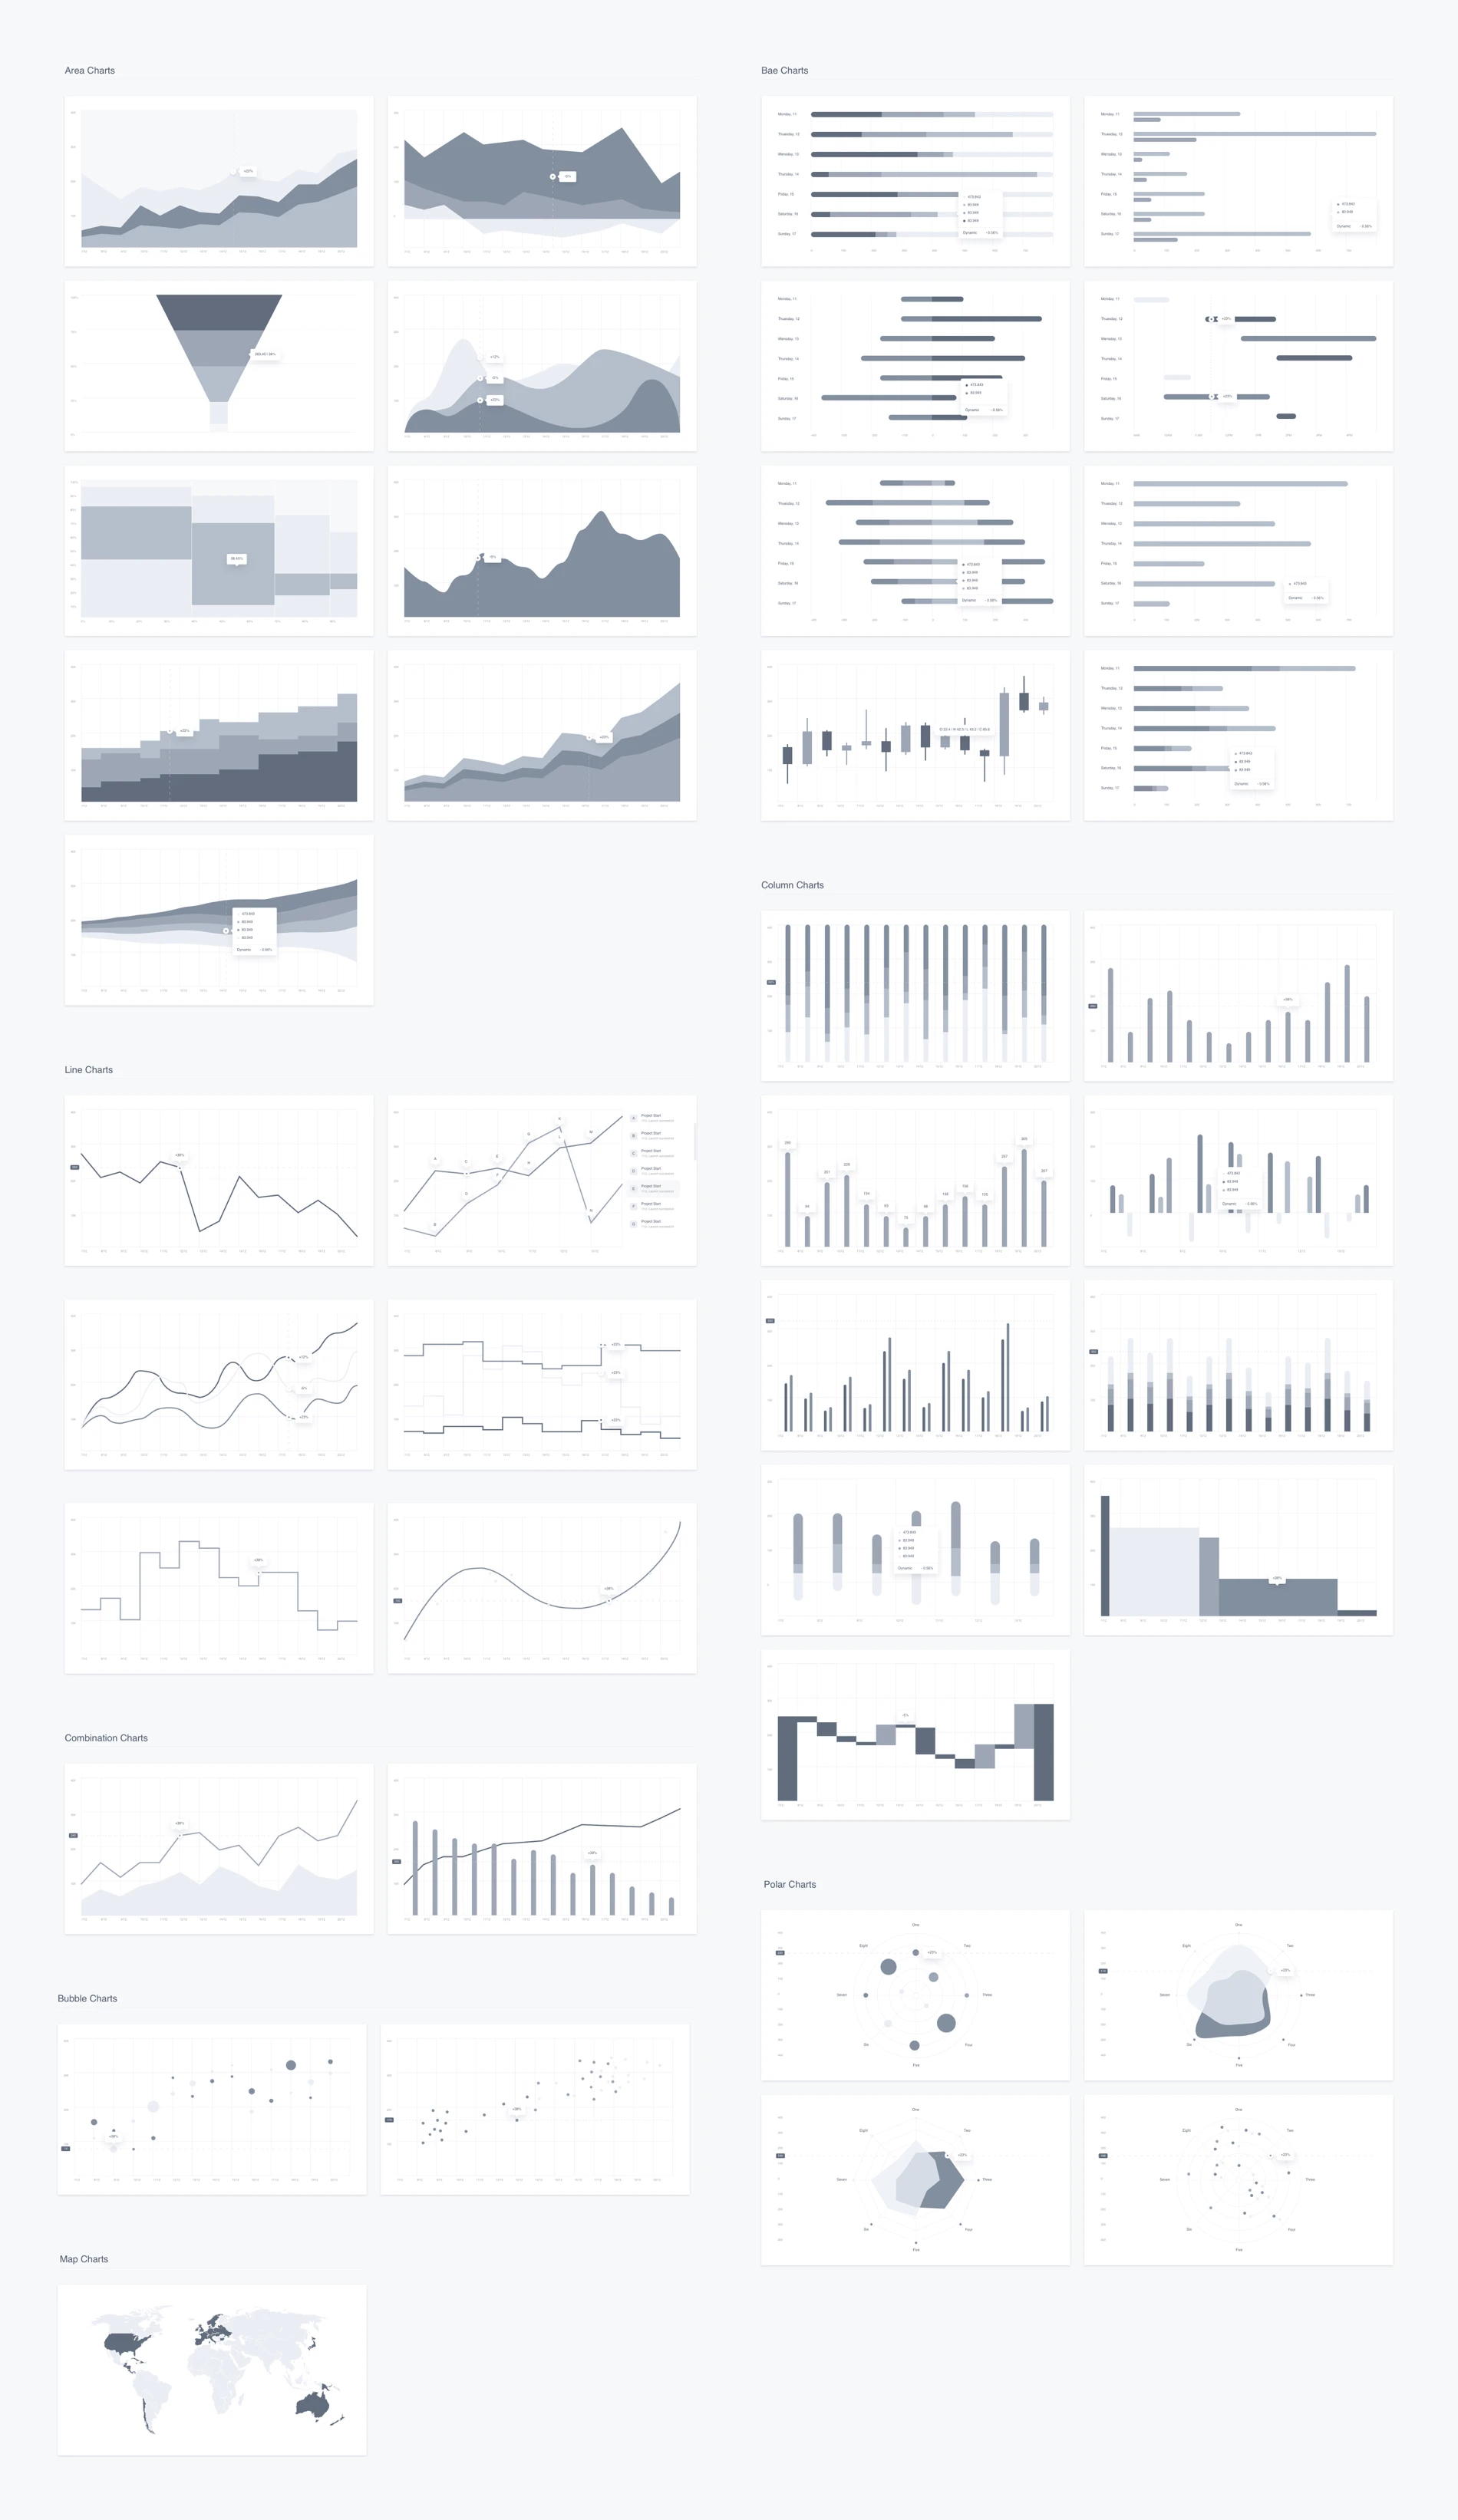 Charts - Free Design System for Sketch - The most comprehensive collection of charts, graphs and diagrams for Sketch. 3 Pre-Made color schemes already included: Standart, Black, Wireframe.